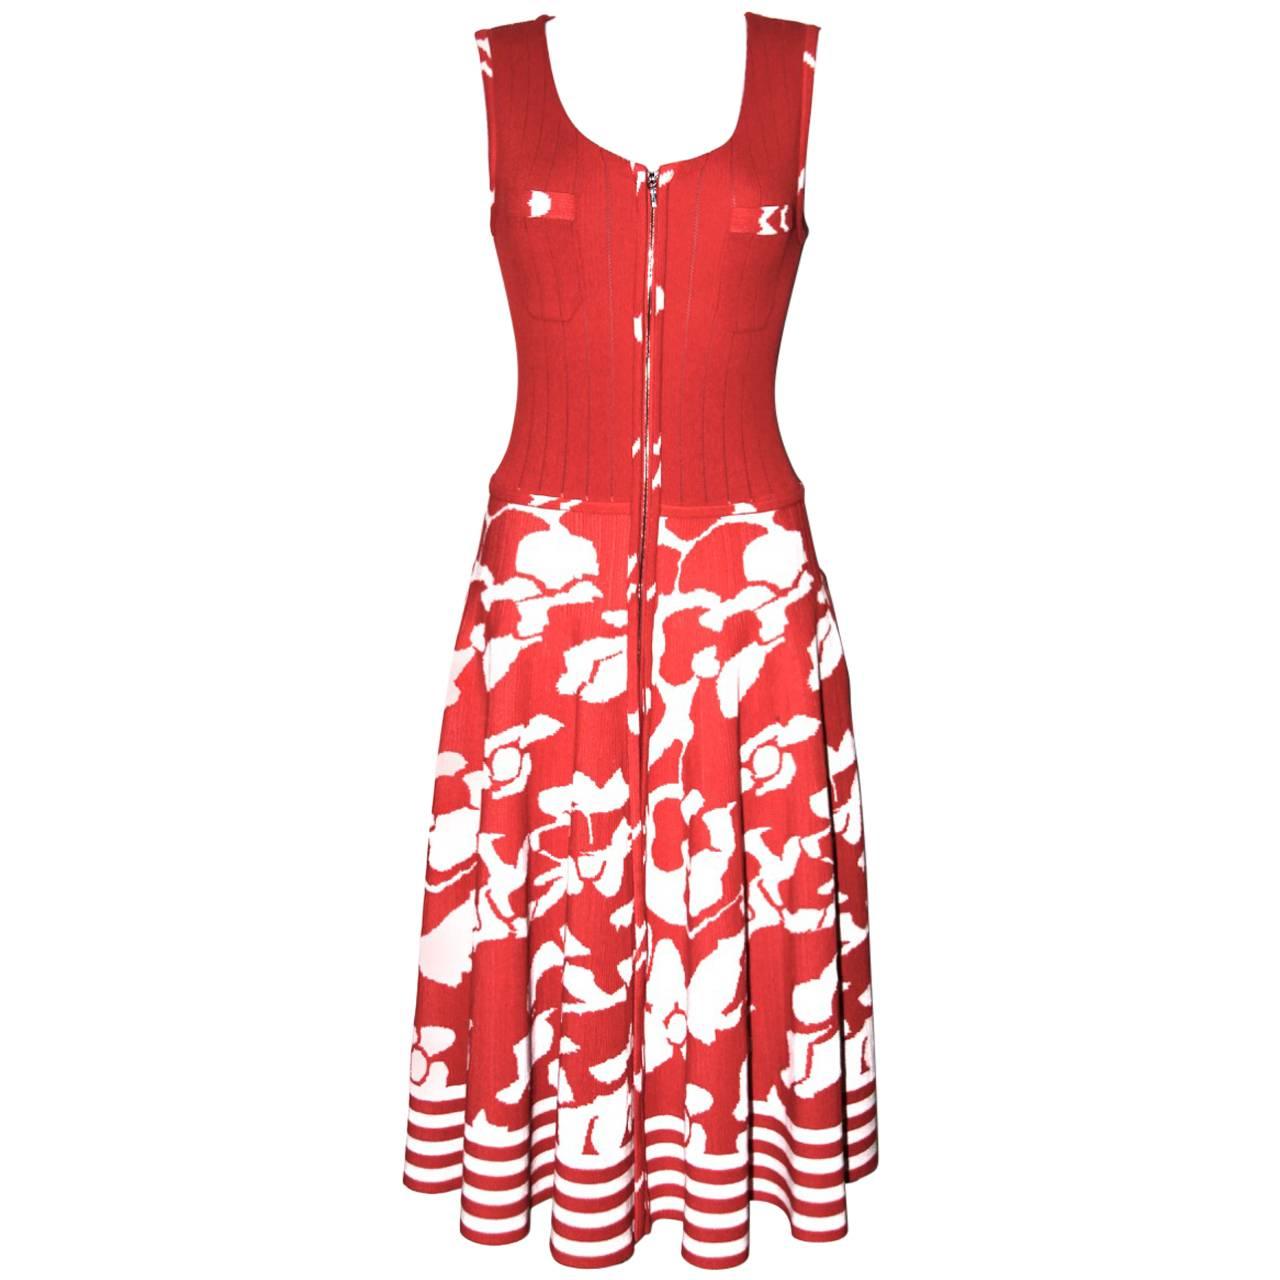 Chanel Red/White Stretch Knit Floral Dress 